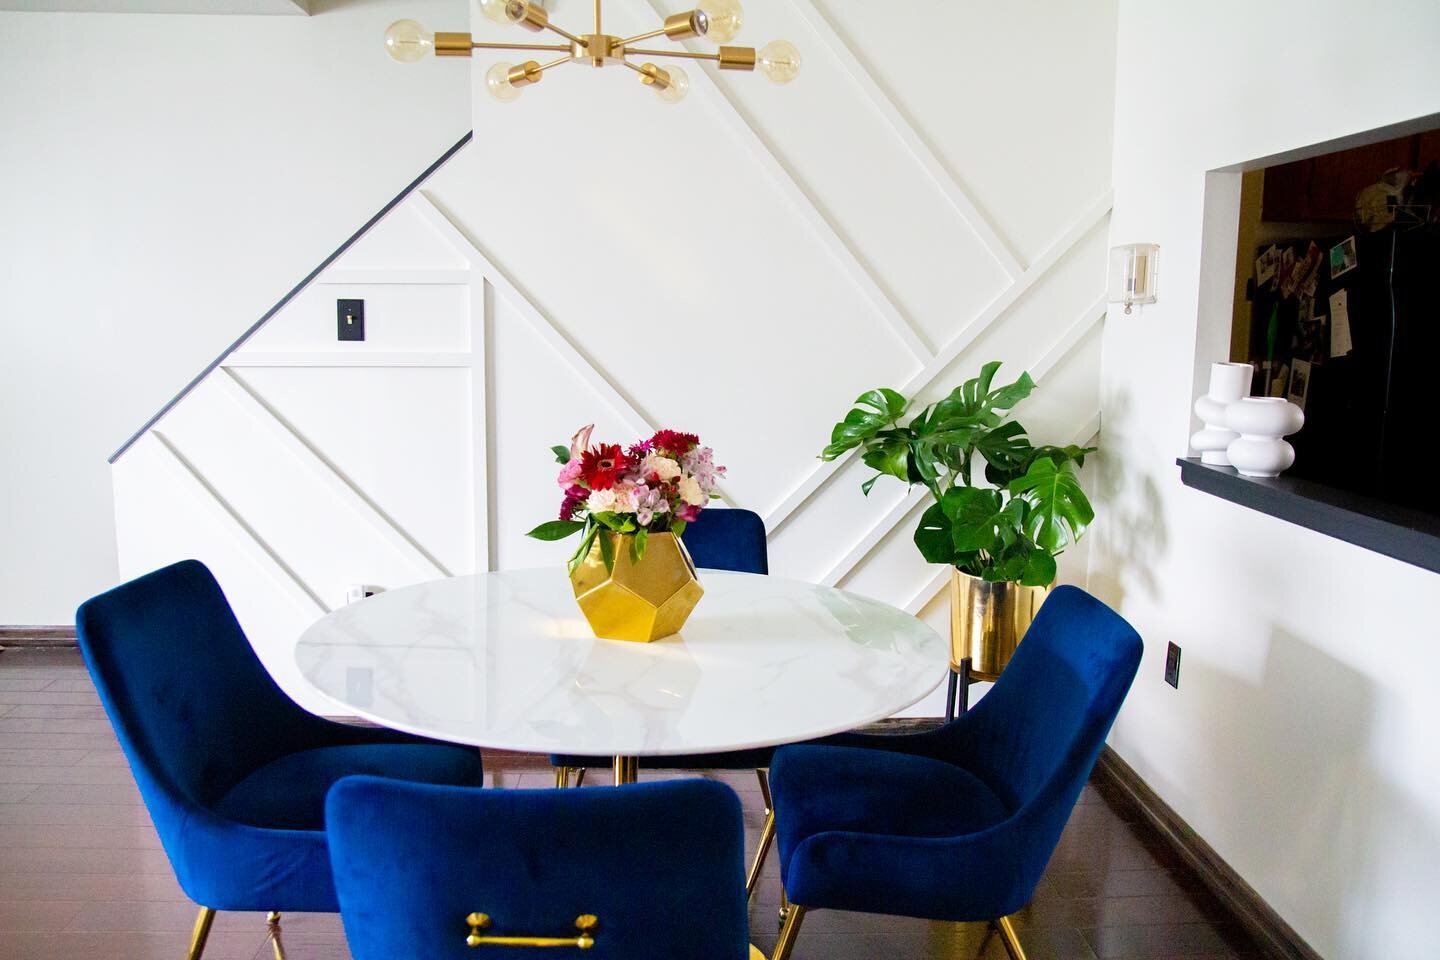 We are so thrilled to share this MASSIVE transformation of @neshasagenda dining room space. 

Our Founder &amp; CEO, @victorialeejones and the VLI Comms + Design Team were all hands on to create this beautiful space. We partnered with @neshasagenda a